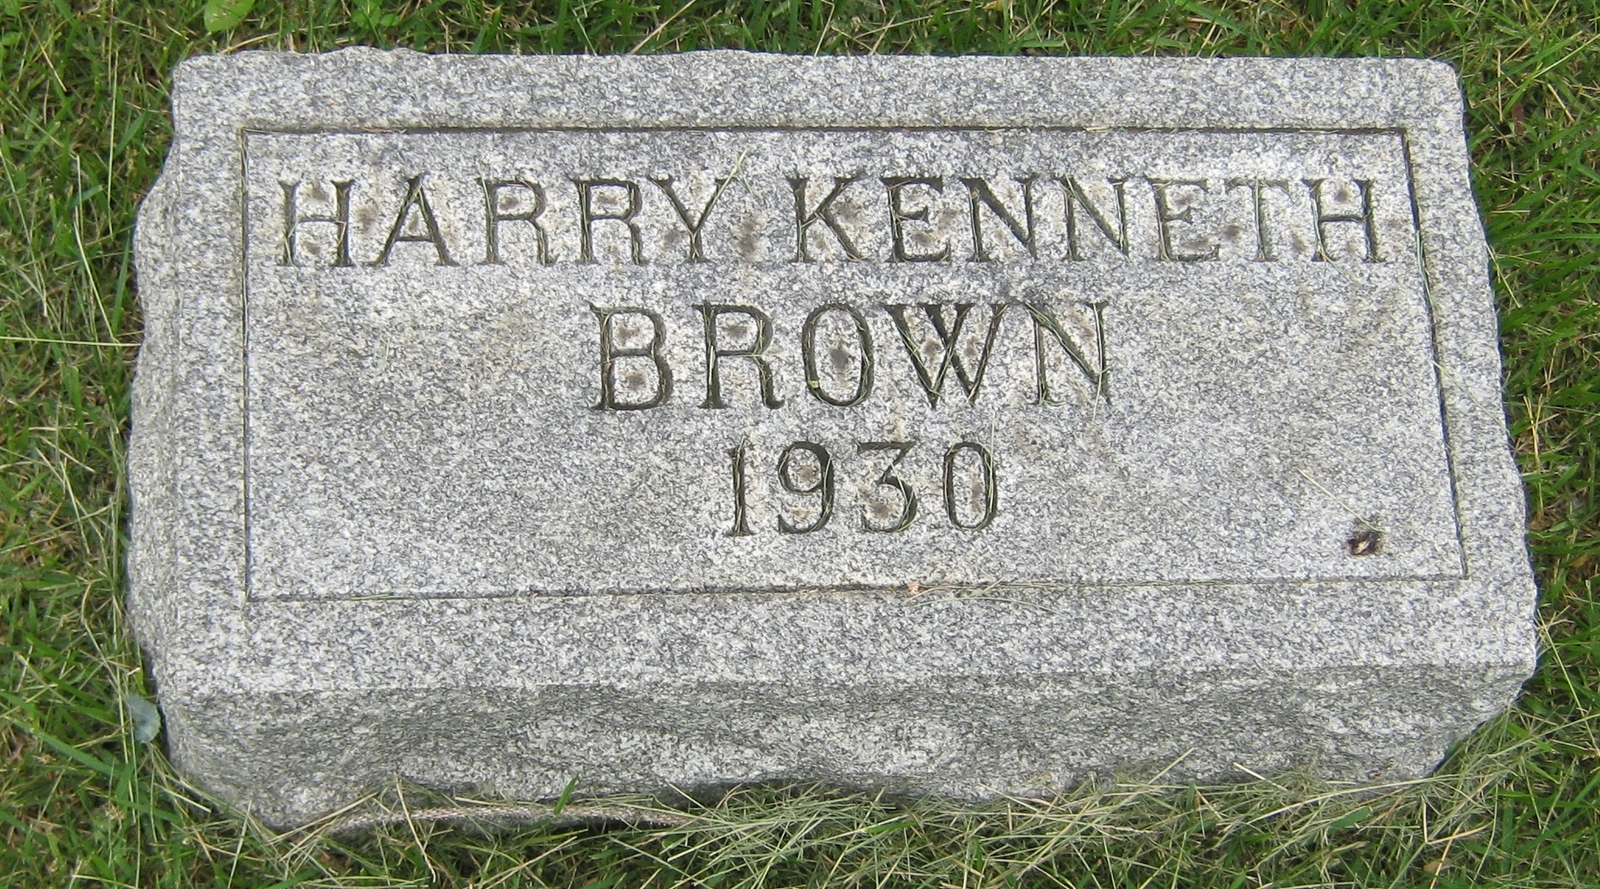 Harry Kenneth Brown